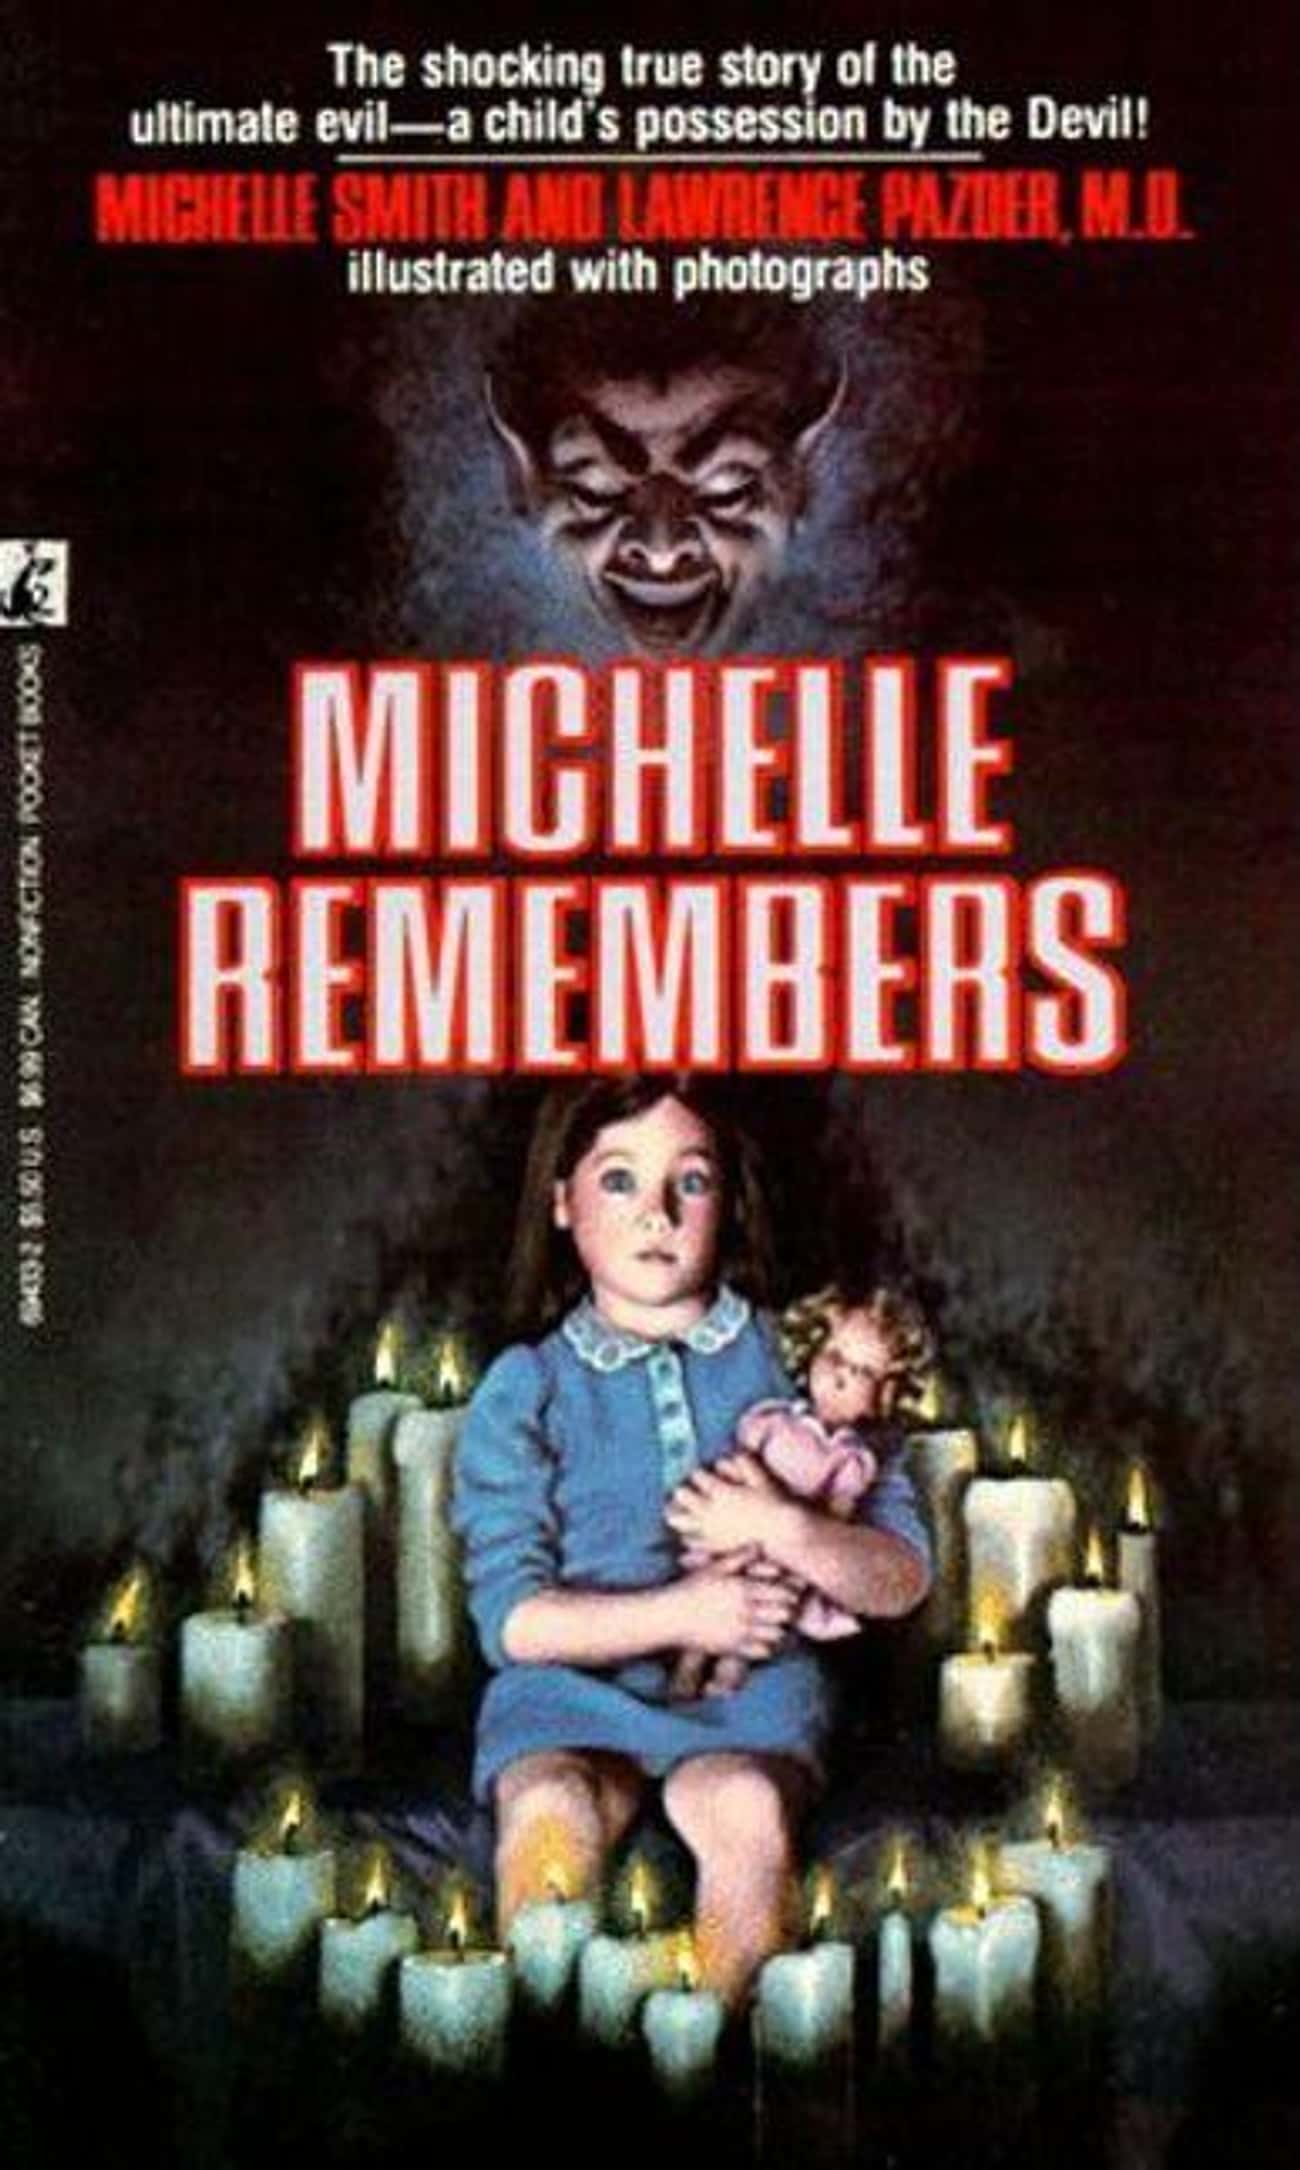 1980: The Dubious Book 'Michelle Remembers' Inspires The 'Day Care Panic' 